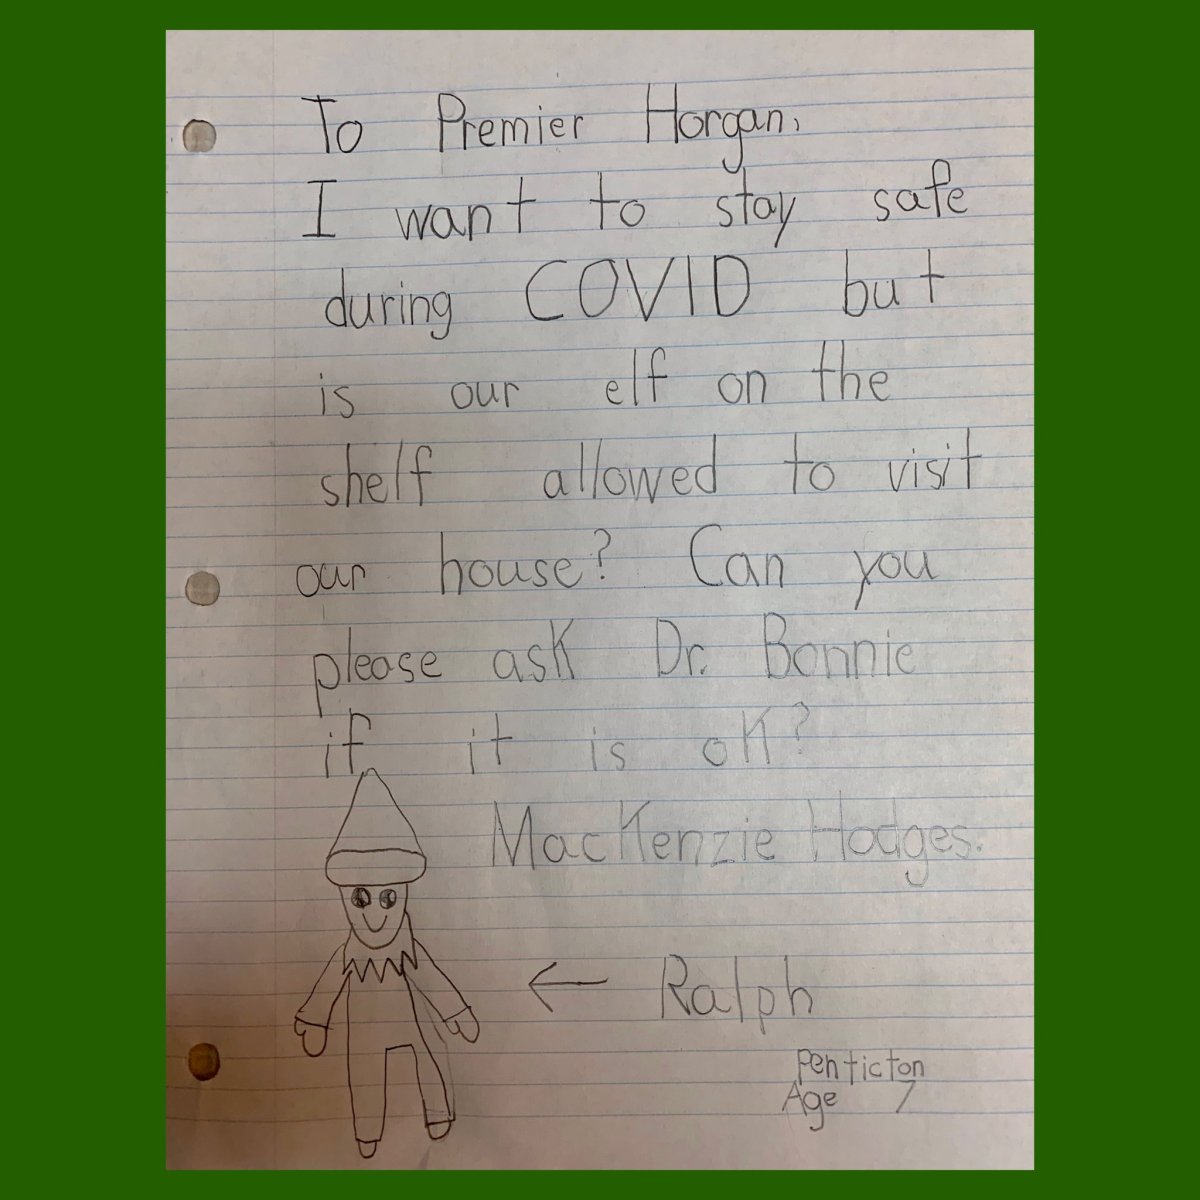 B.C. premier John Horgan shared a letter he received from a Penticton child inquiring if her "Elf on the Shelf" could be included in her family's social bubble, as B.C. restricts social gatherings to combat the spread of COVID-19.